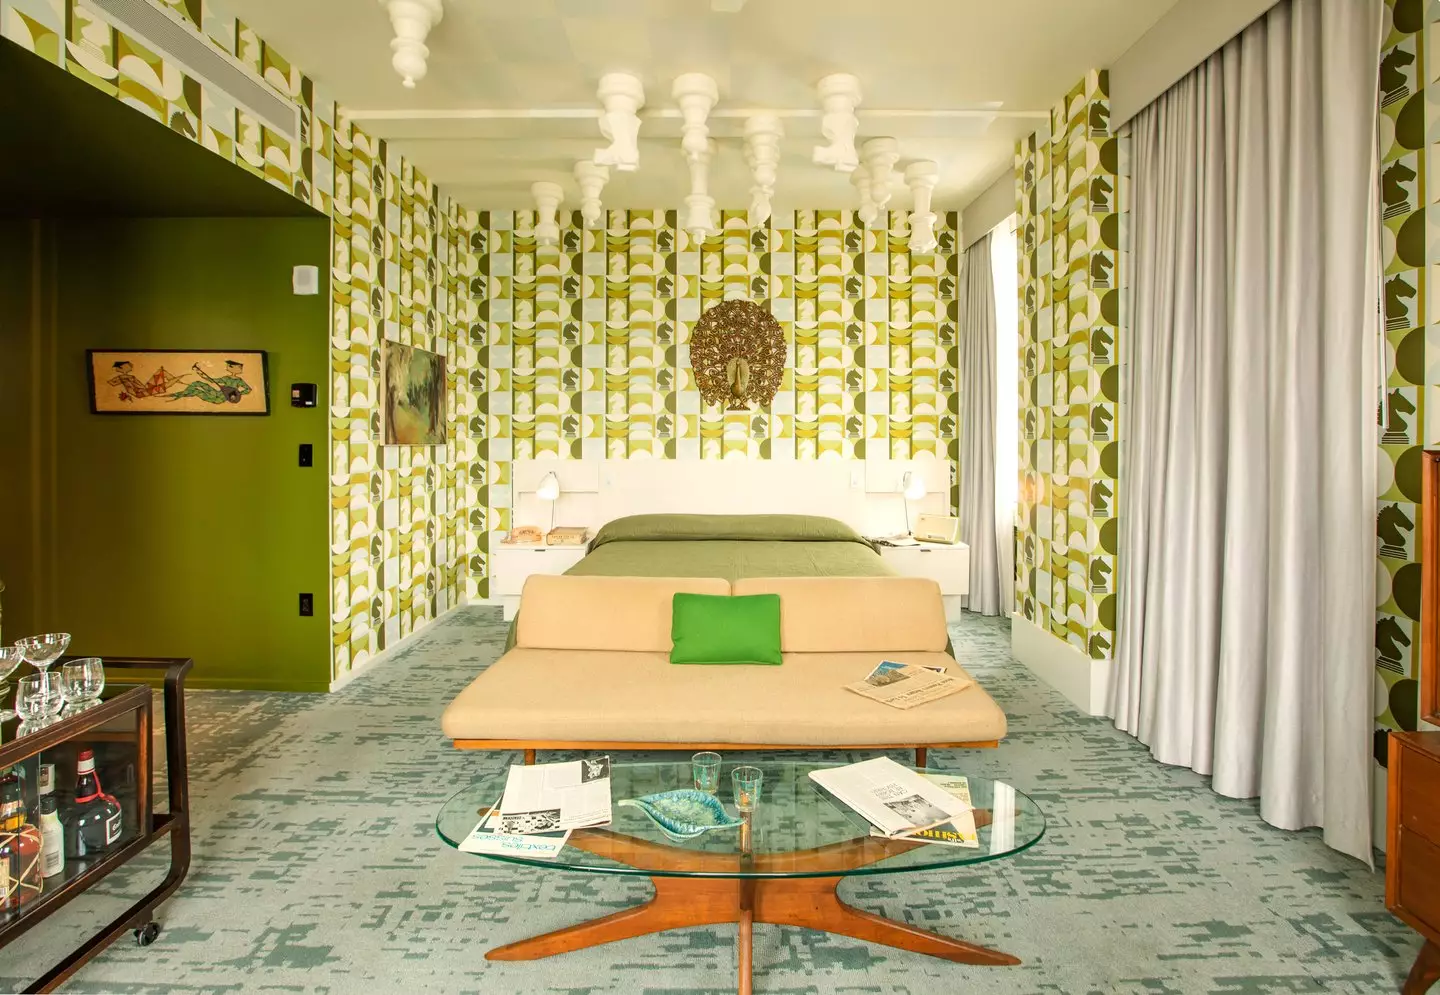 You can now stay in a retro hotel room inspired by Queen's Gambit (